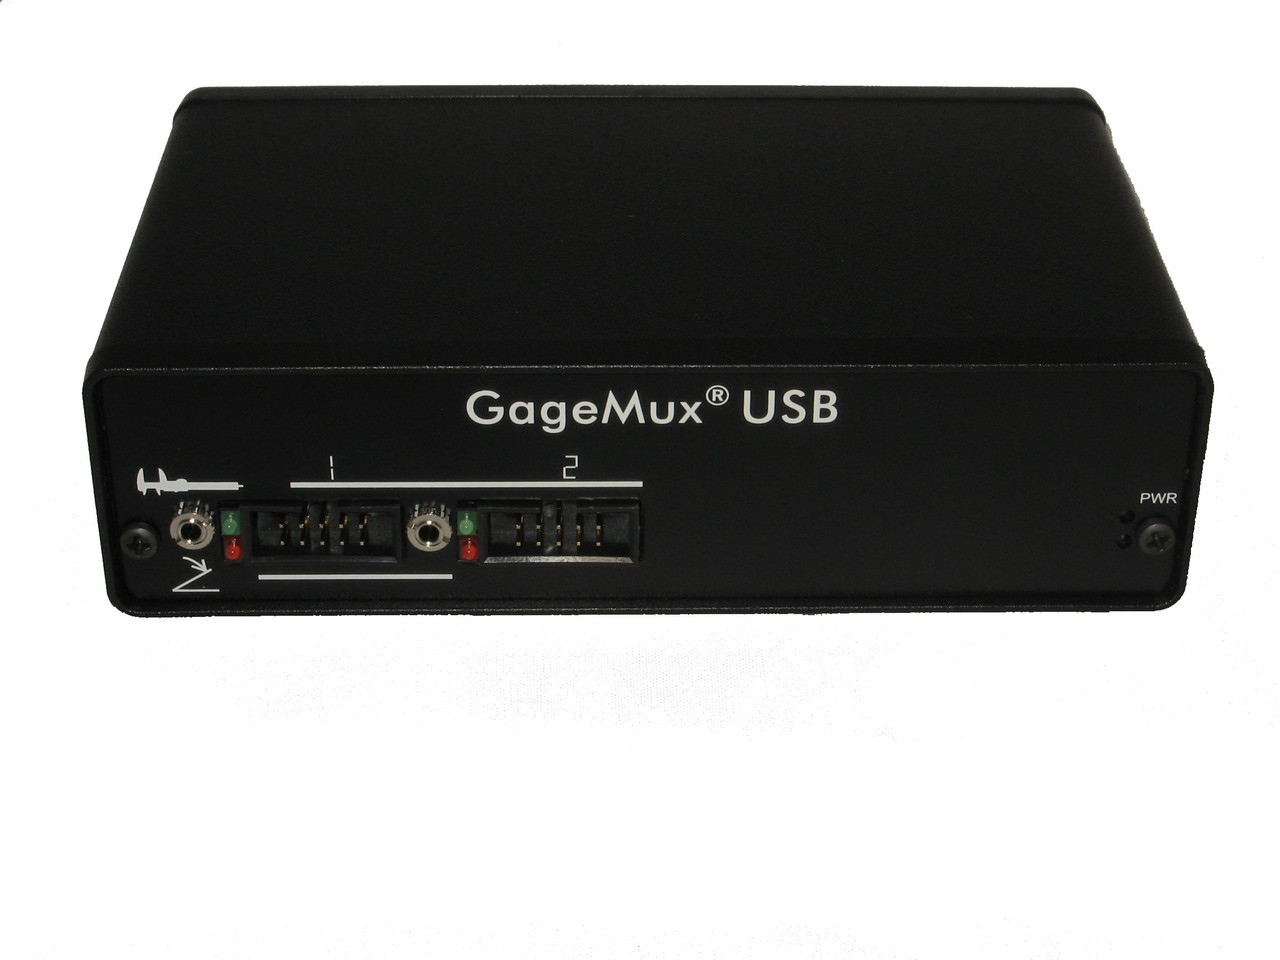 2-port GageMux USB Universal Gage Interface with Excel Output